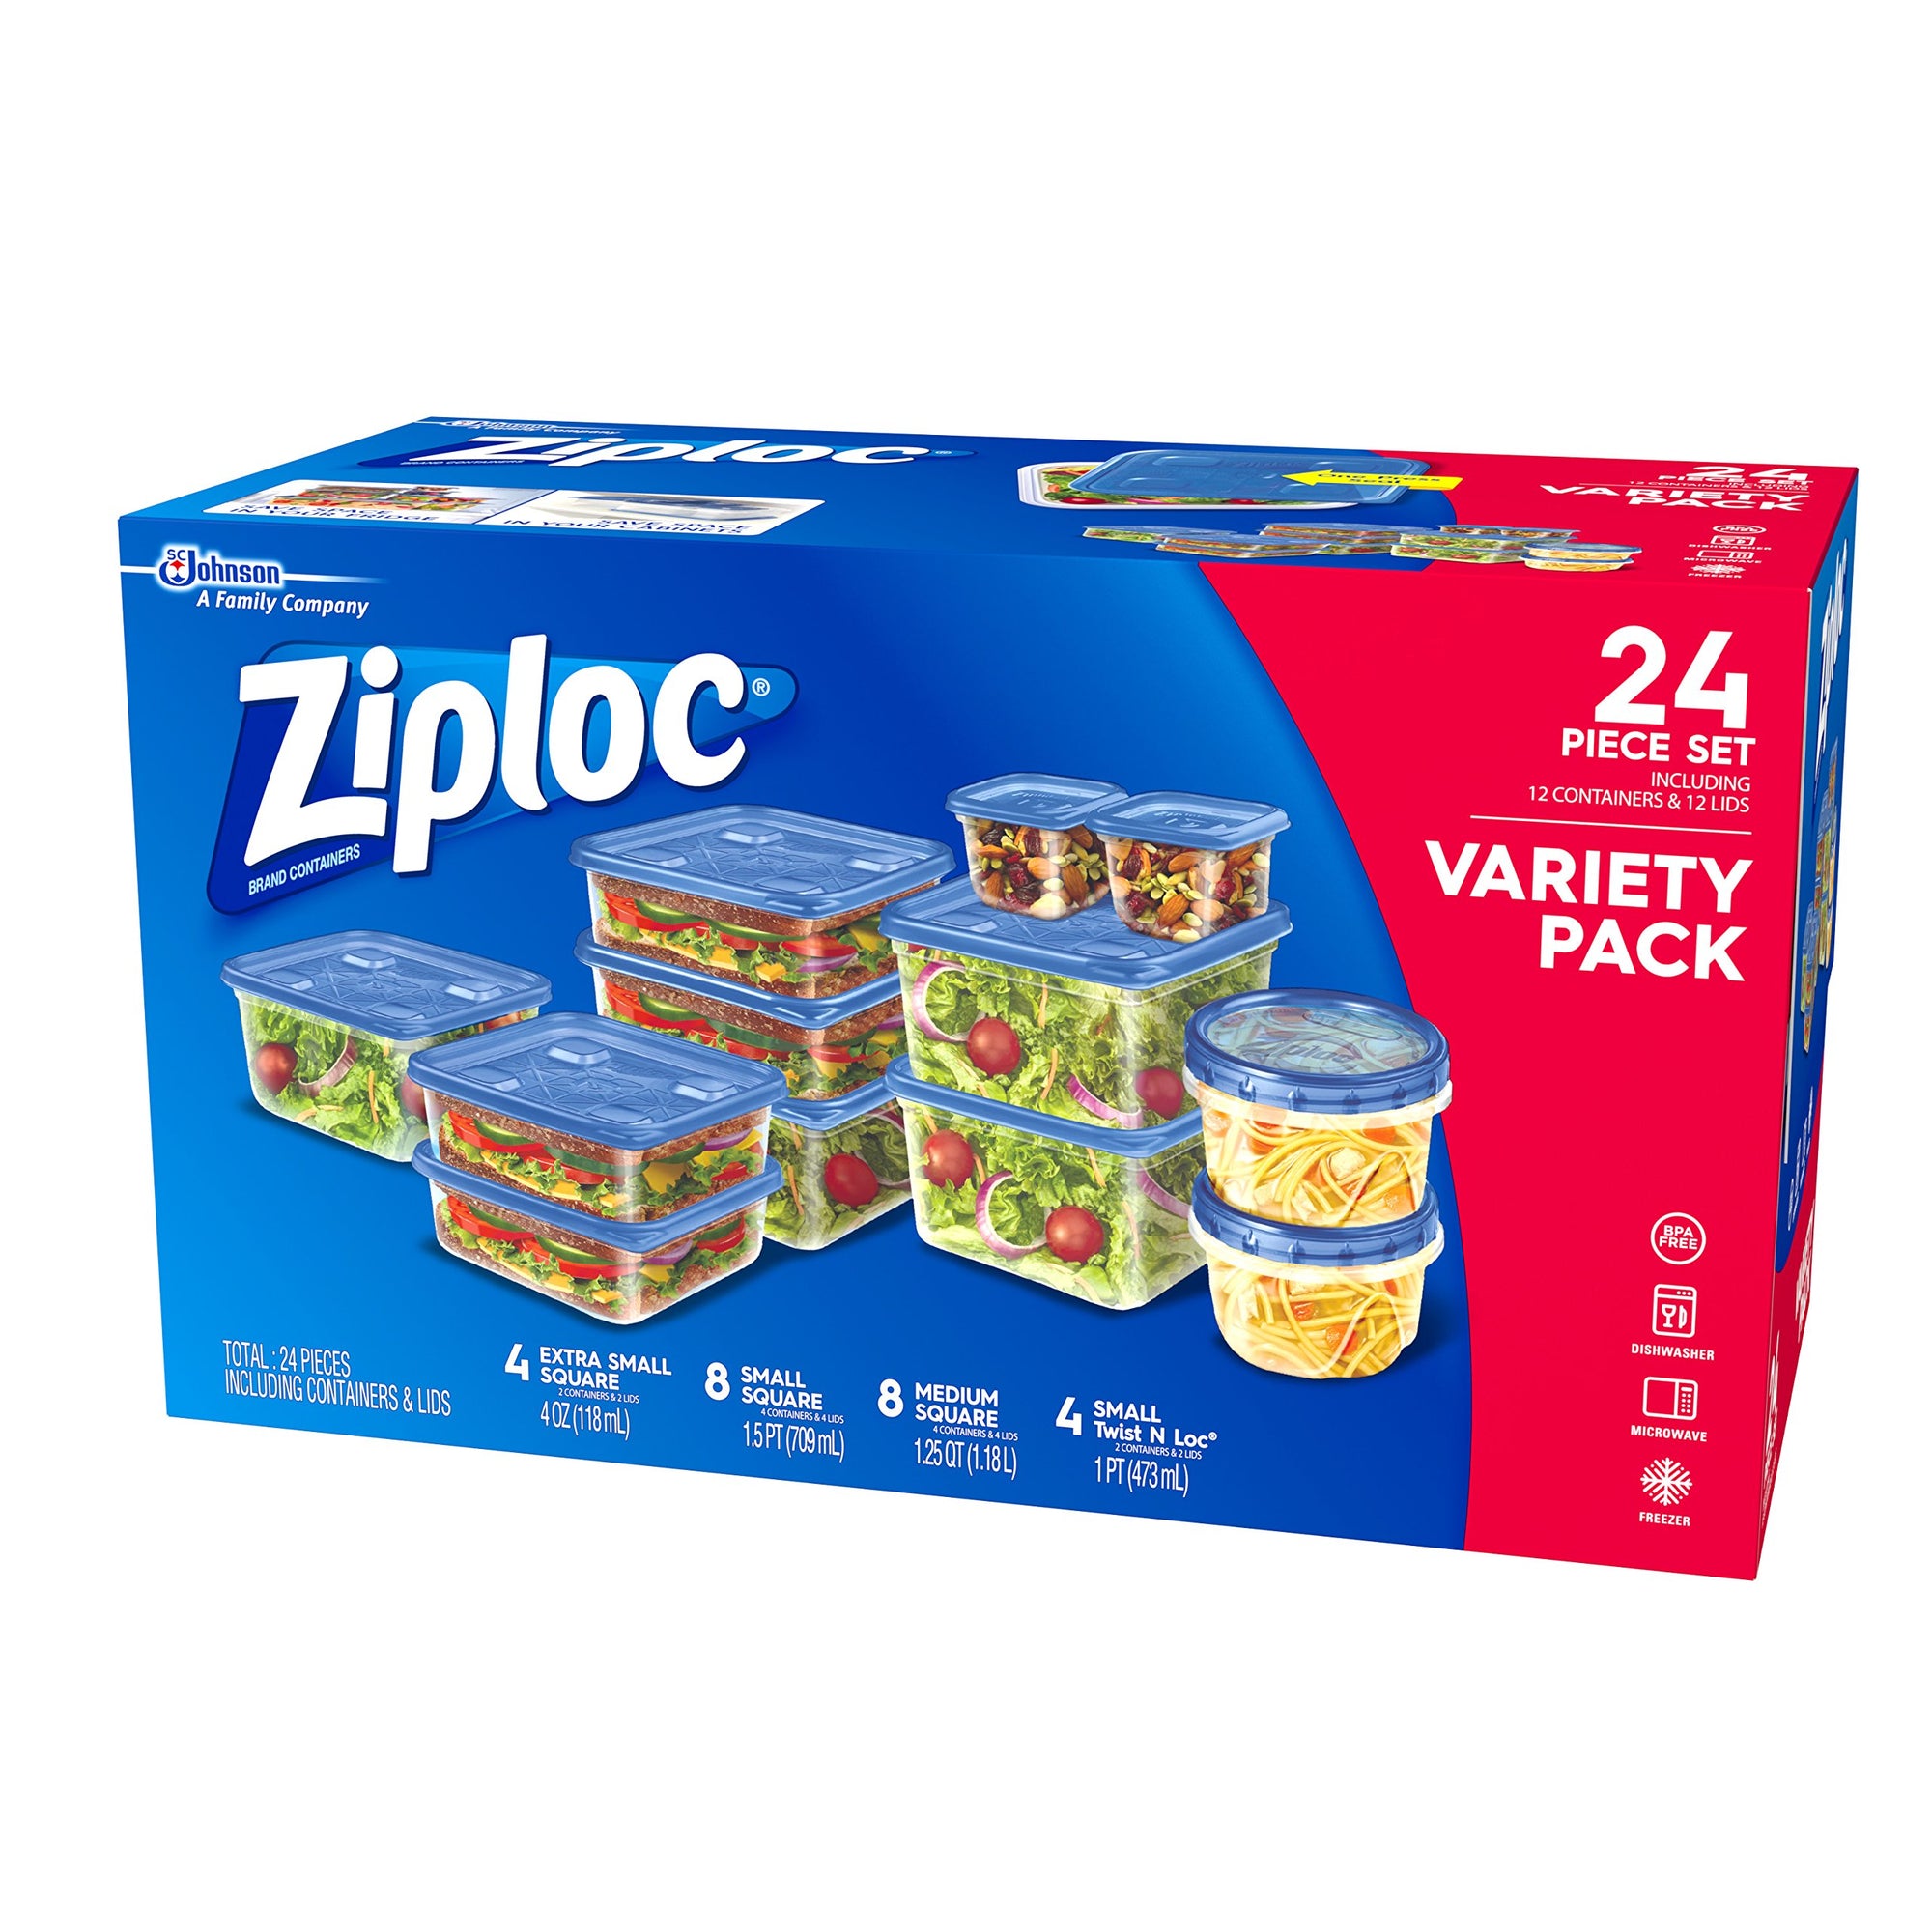 Ziploc Small Square with Lids